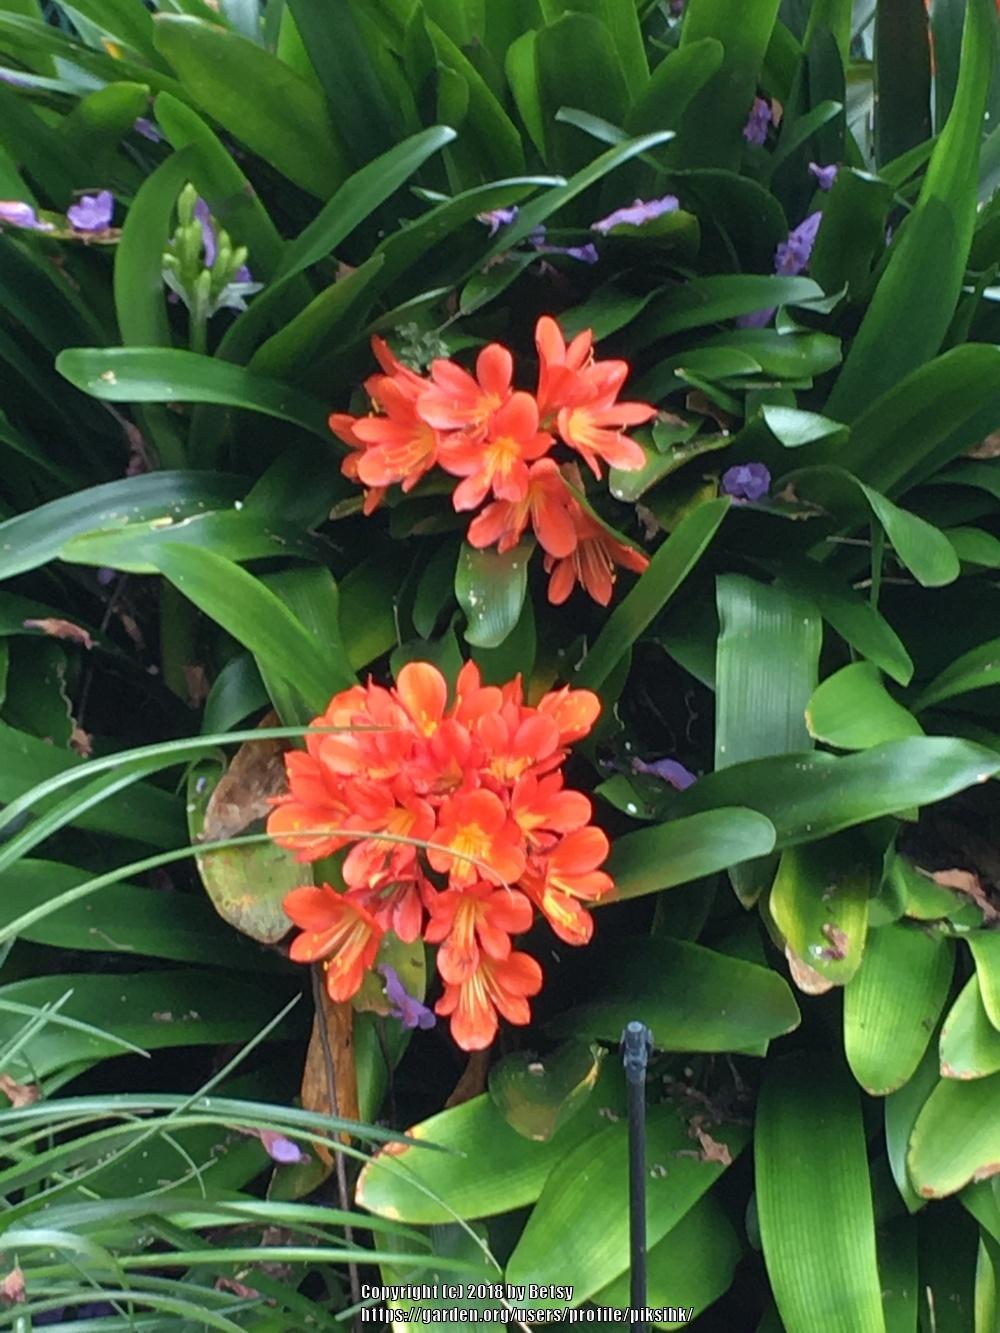 Photo of Clivias (Clivia) uploaded by piksihk